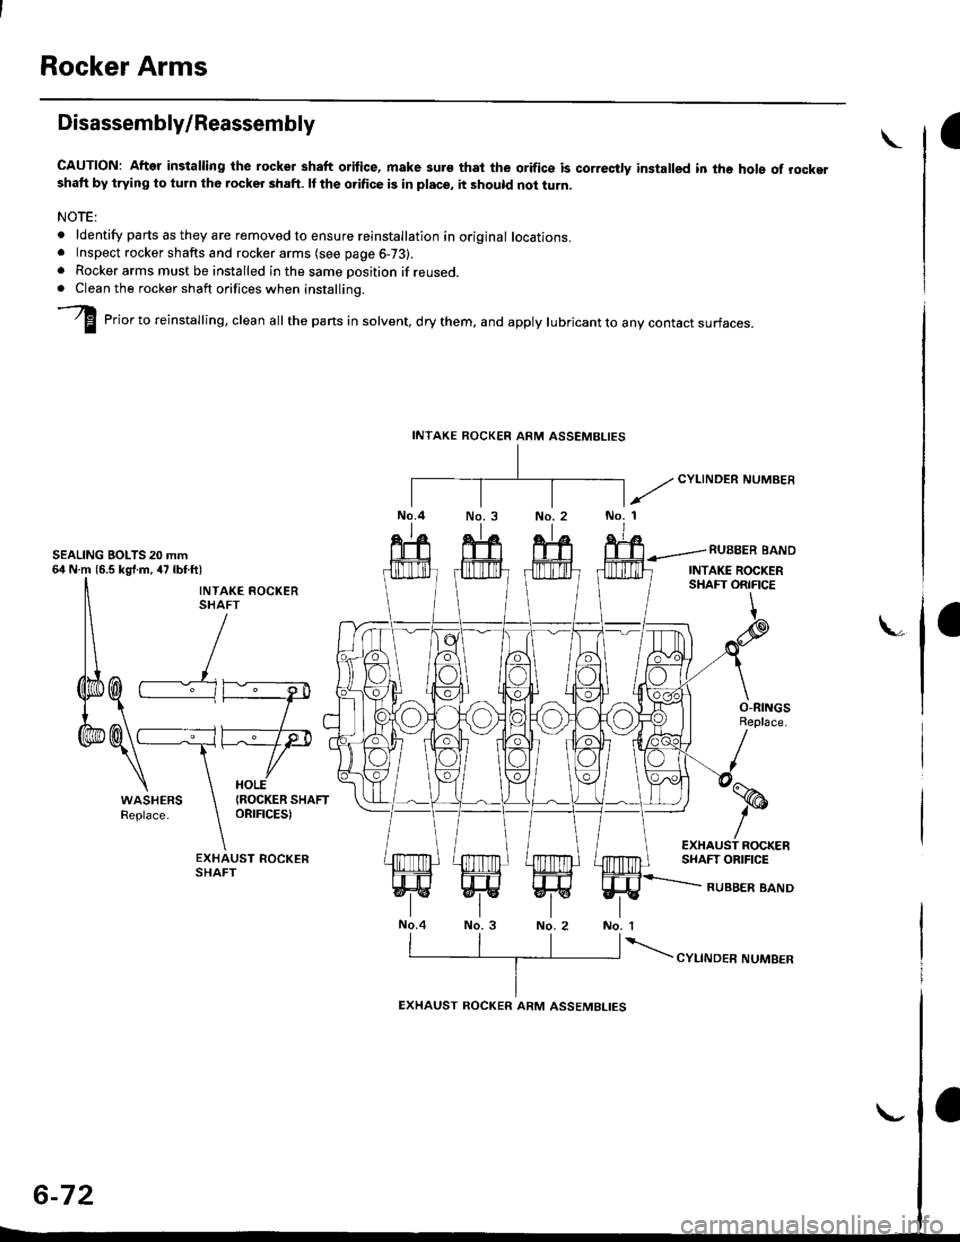 HONDA CIVIC 1997 6.G Workshop Manual Rocker Arms
Disassembly/Reassembly
CAUTION: After installing the rocker shaft oritice, make suro thot the orifics is correctly installed in the hole of rockershaft by trying to turn the rocker shaft. 